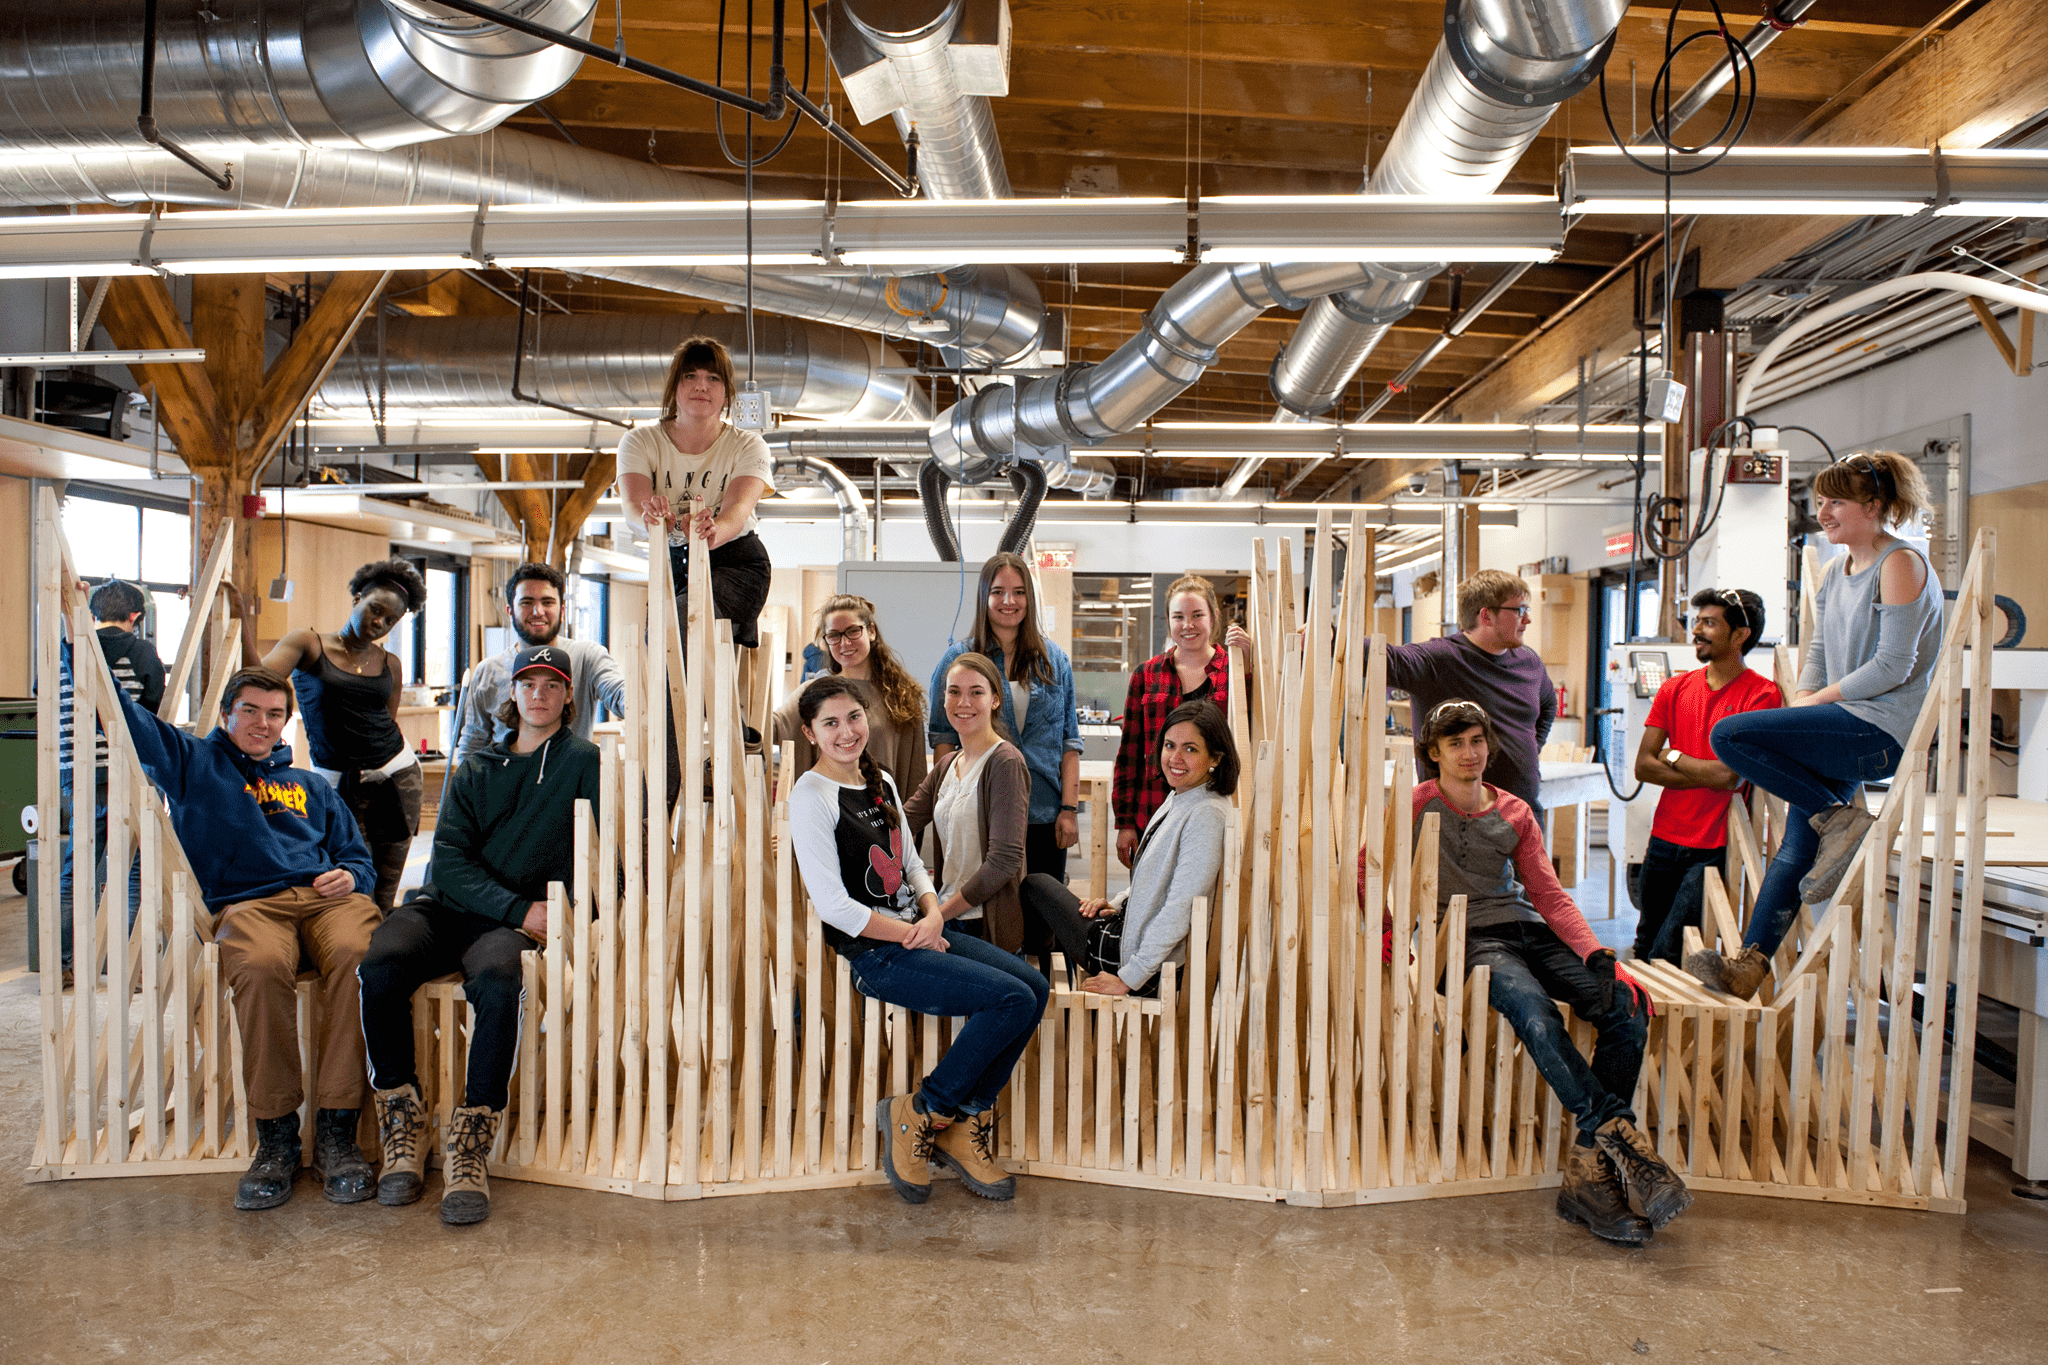 Students around a wooden structure